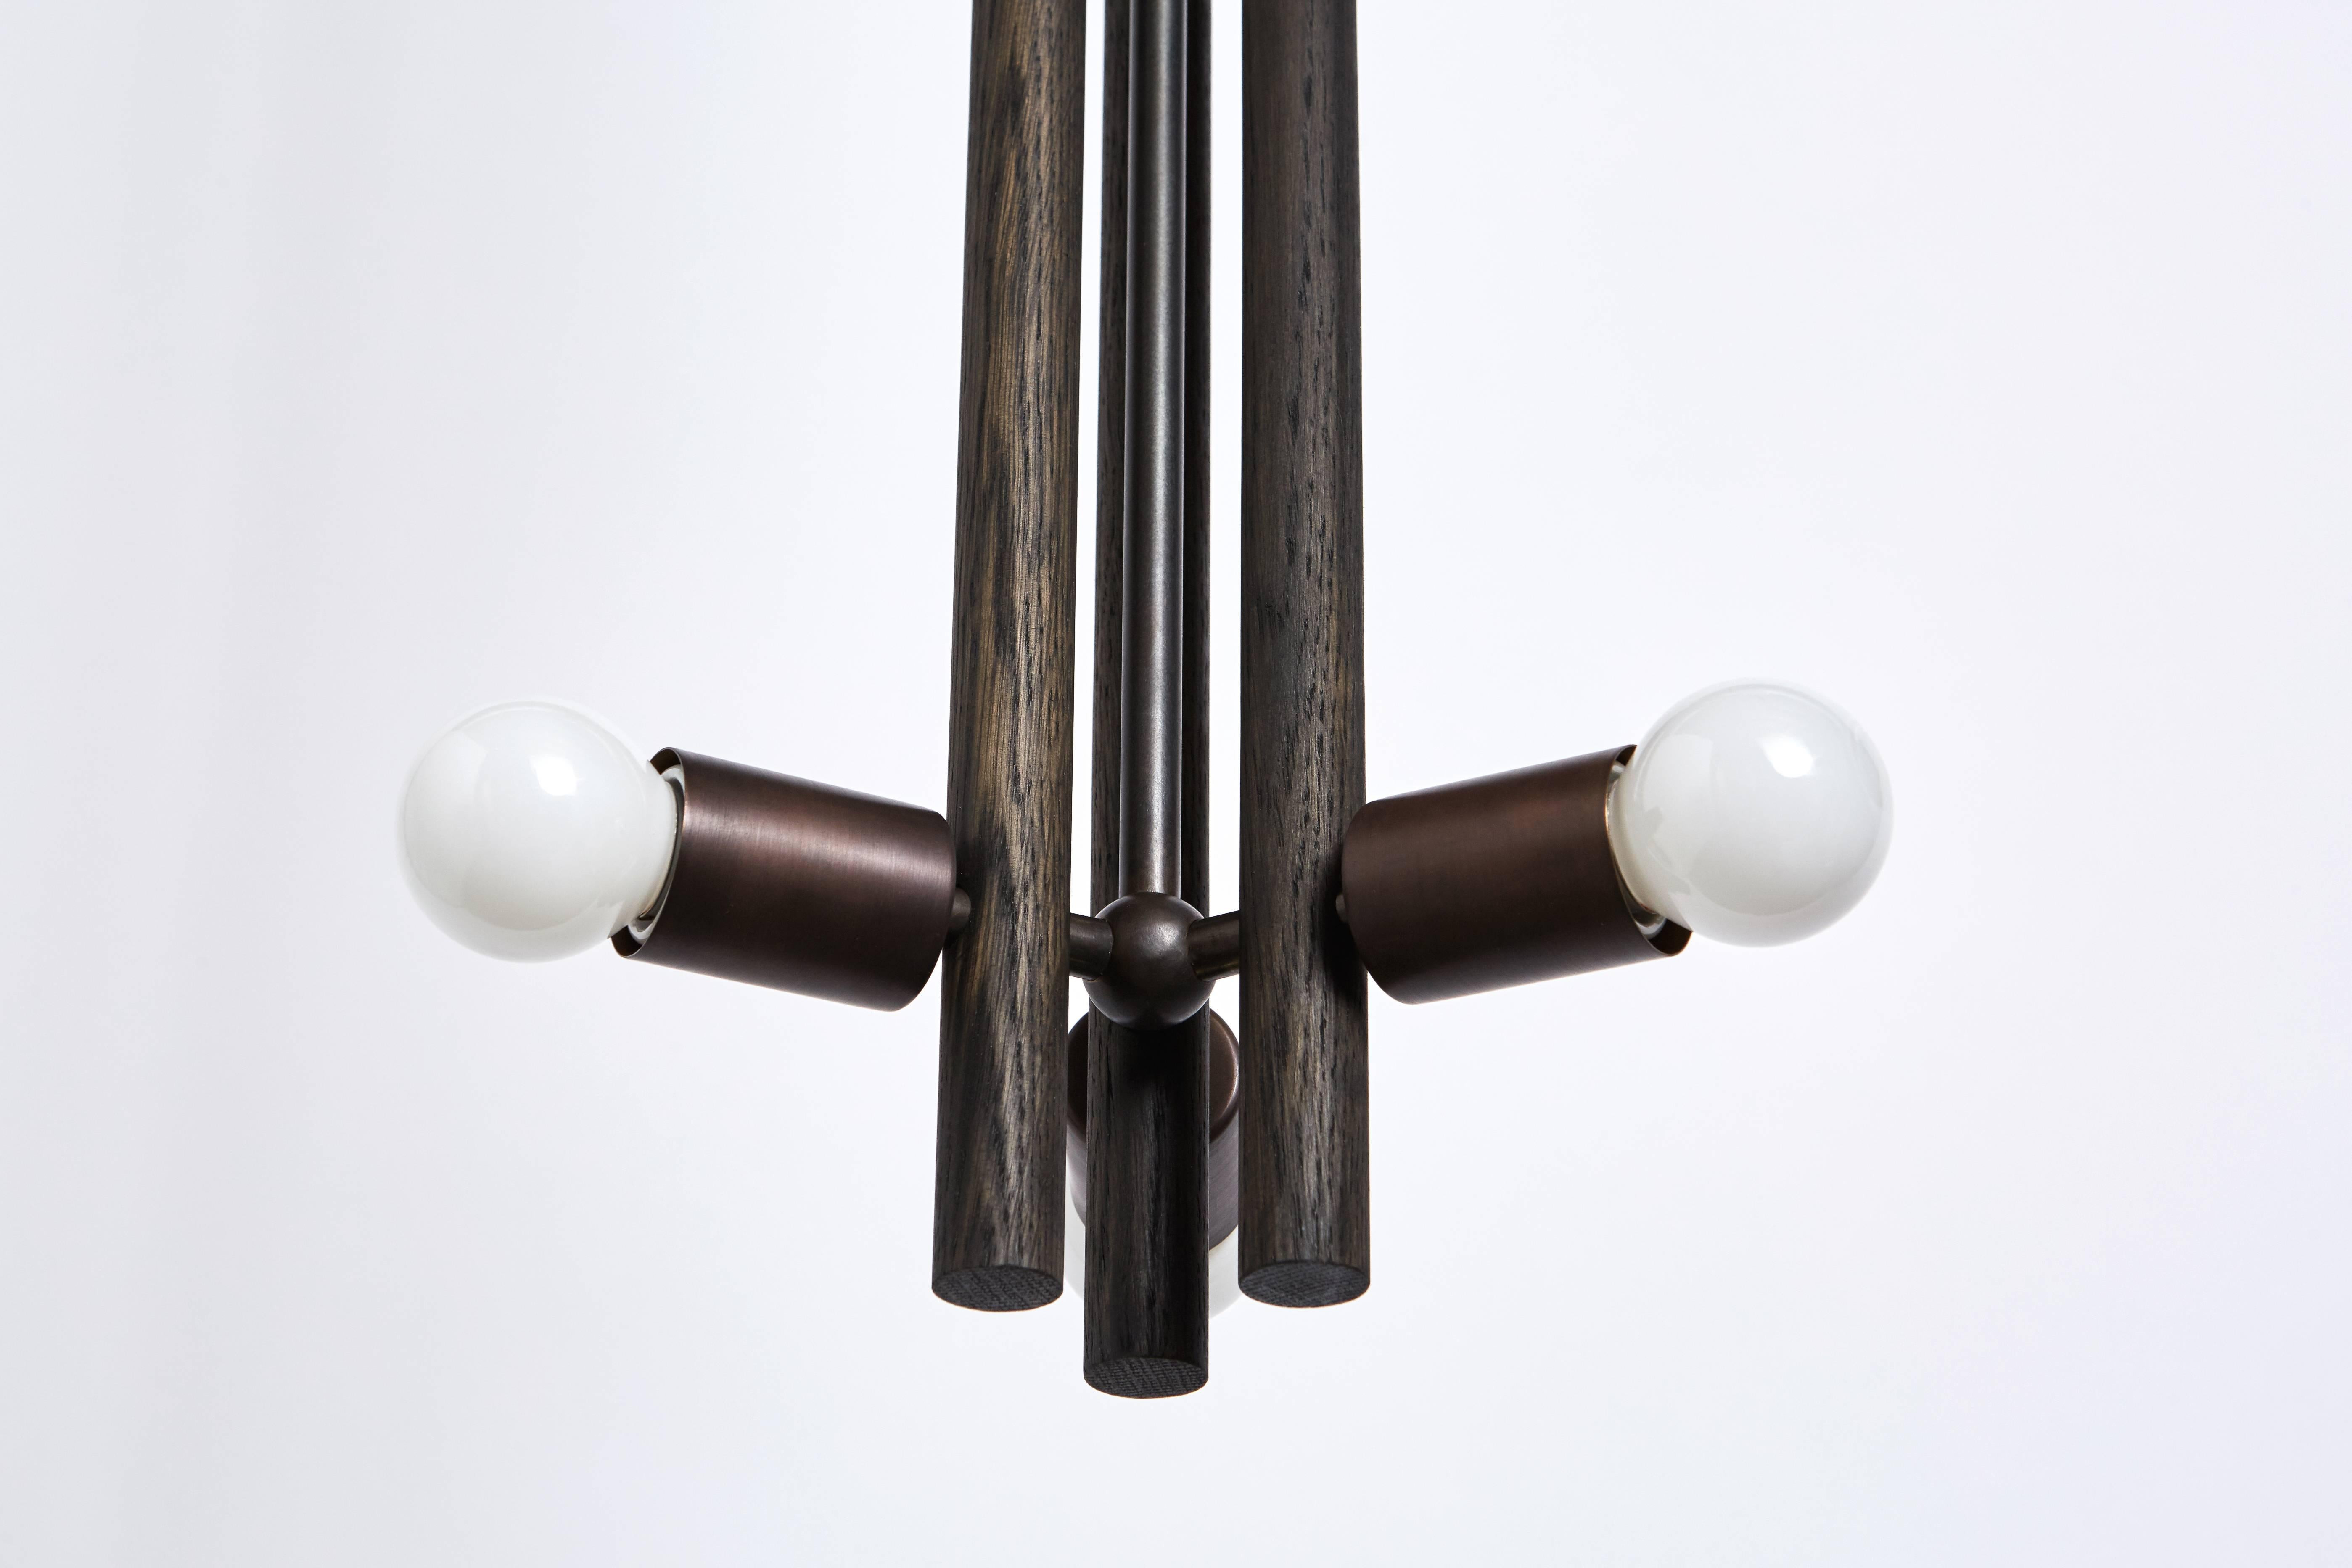 The lodge pendant is a singular wooden column, composed of three turned wooden forms. Held together by a network of metal tubing, with a milled metal ball connection, the bulbs radiate about the column.

Available in oxidized ash/blackened steel and